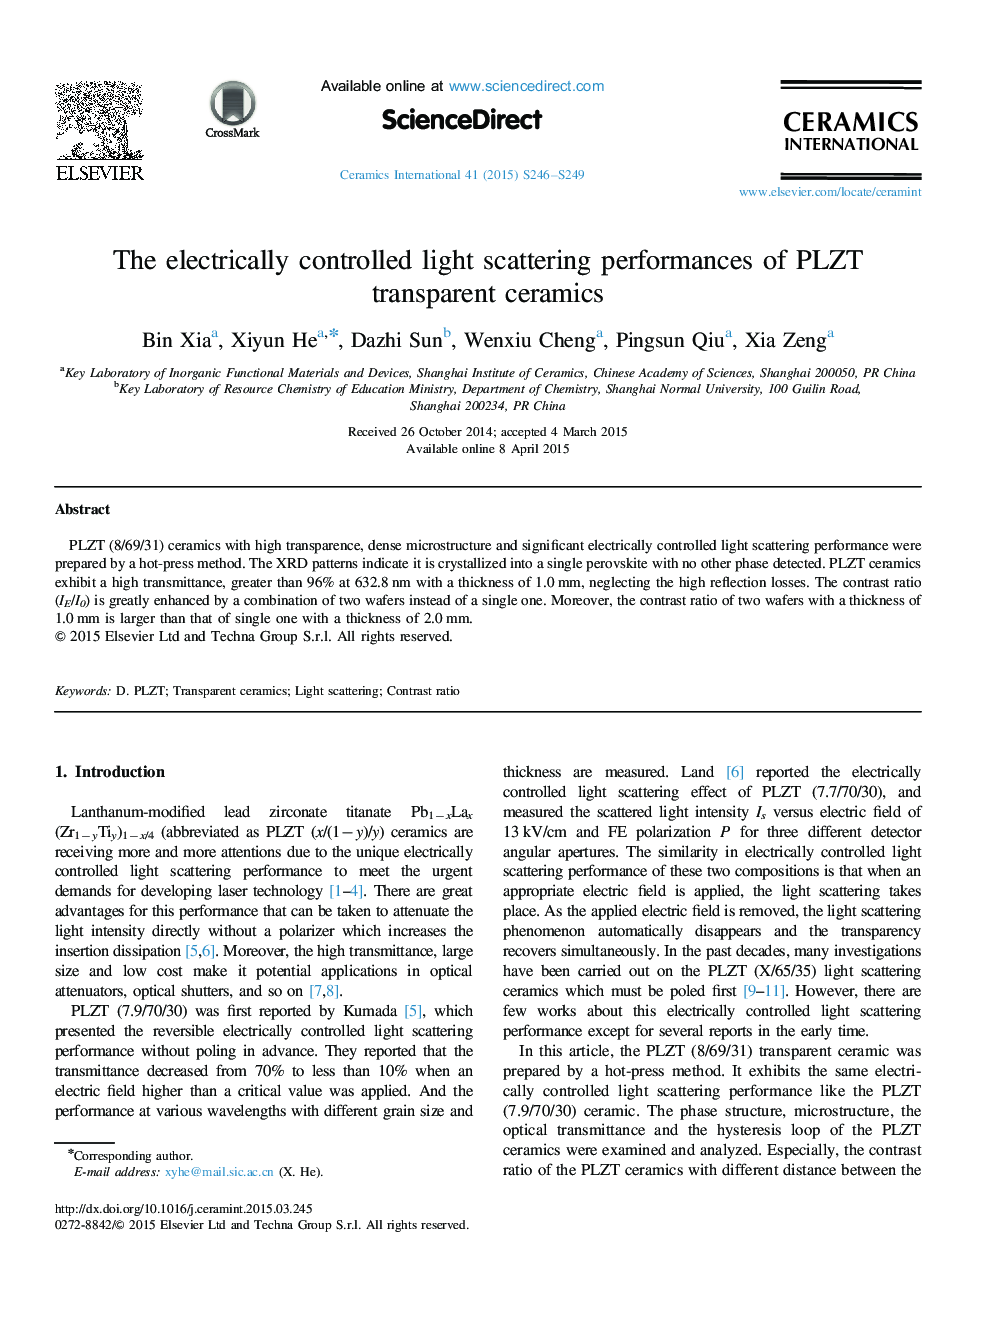 The electrically controlled light scattering performances of PLZT transparent ceramics